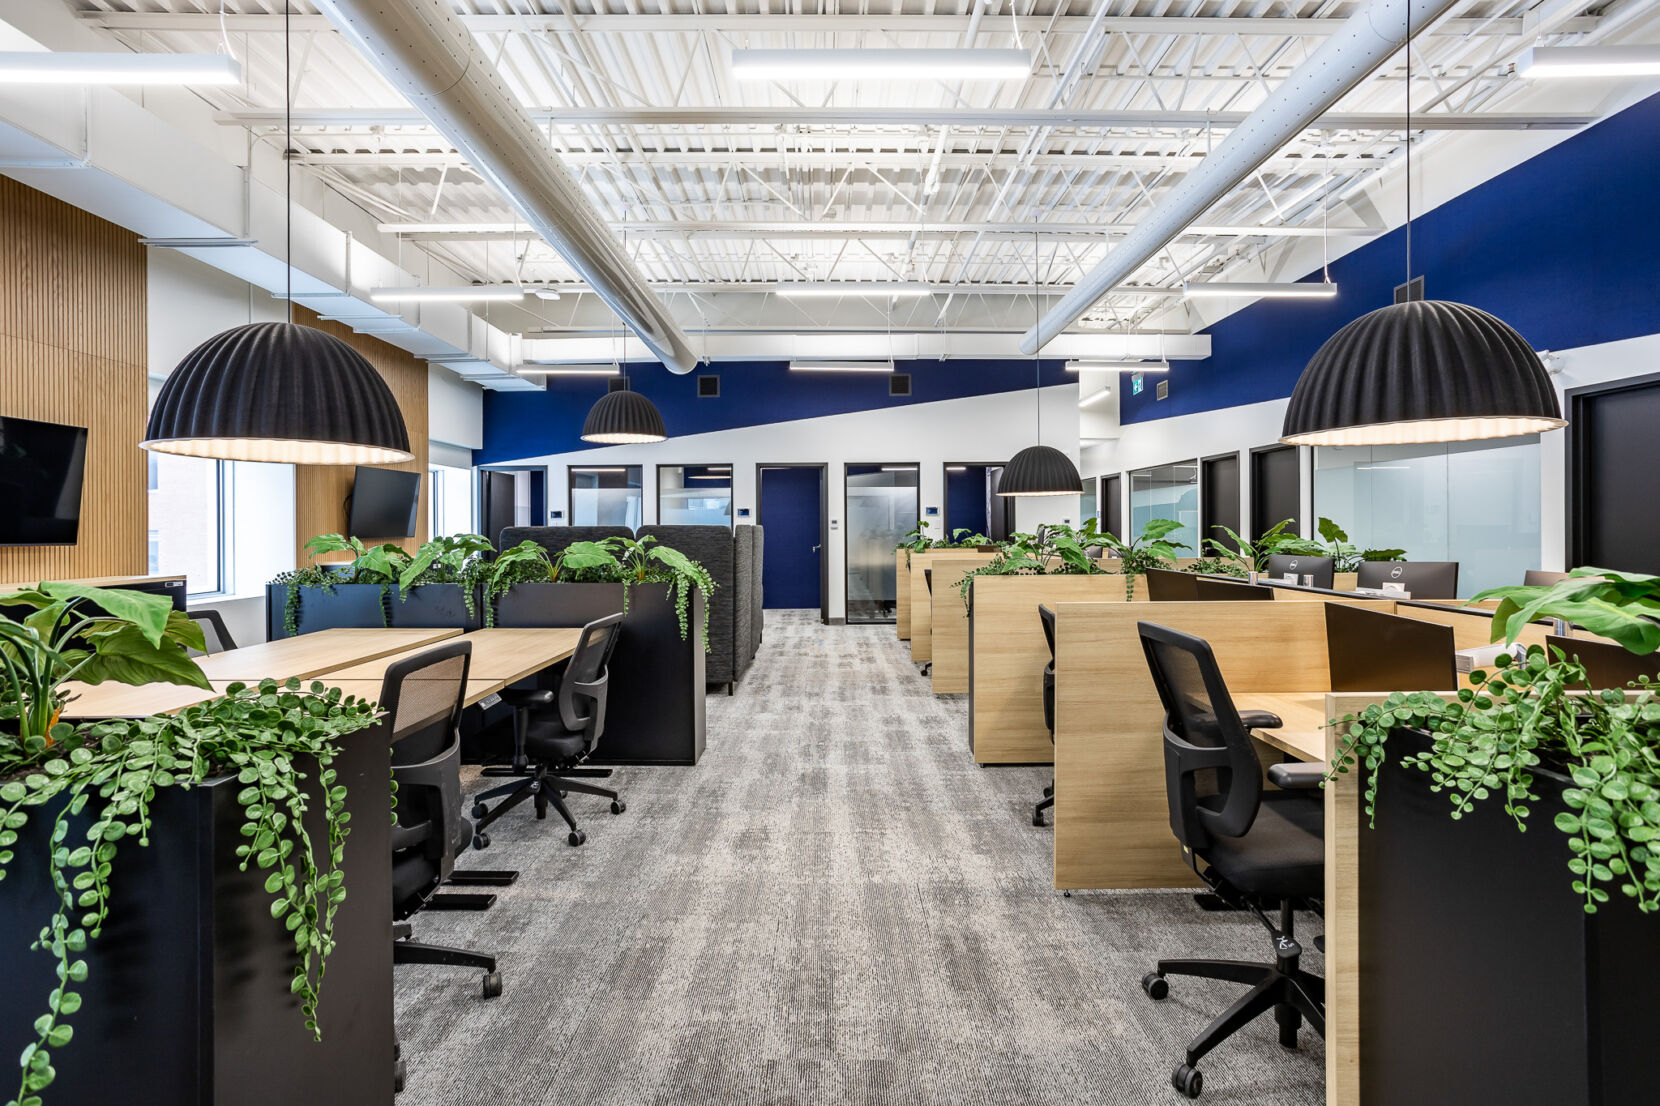 Major Project: a Dynamic and Attractive Space for Employees and Clients